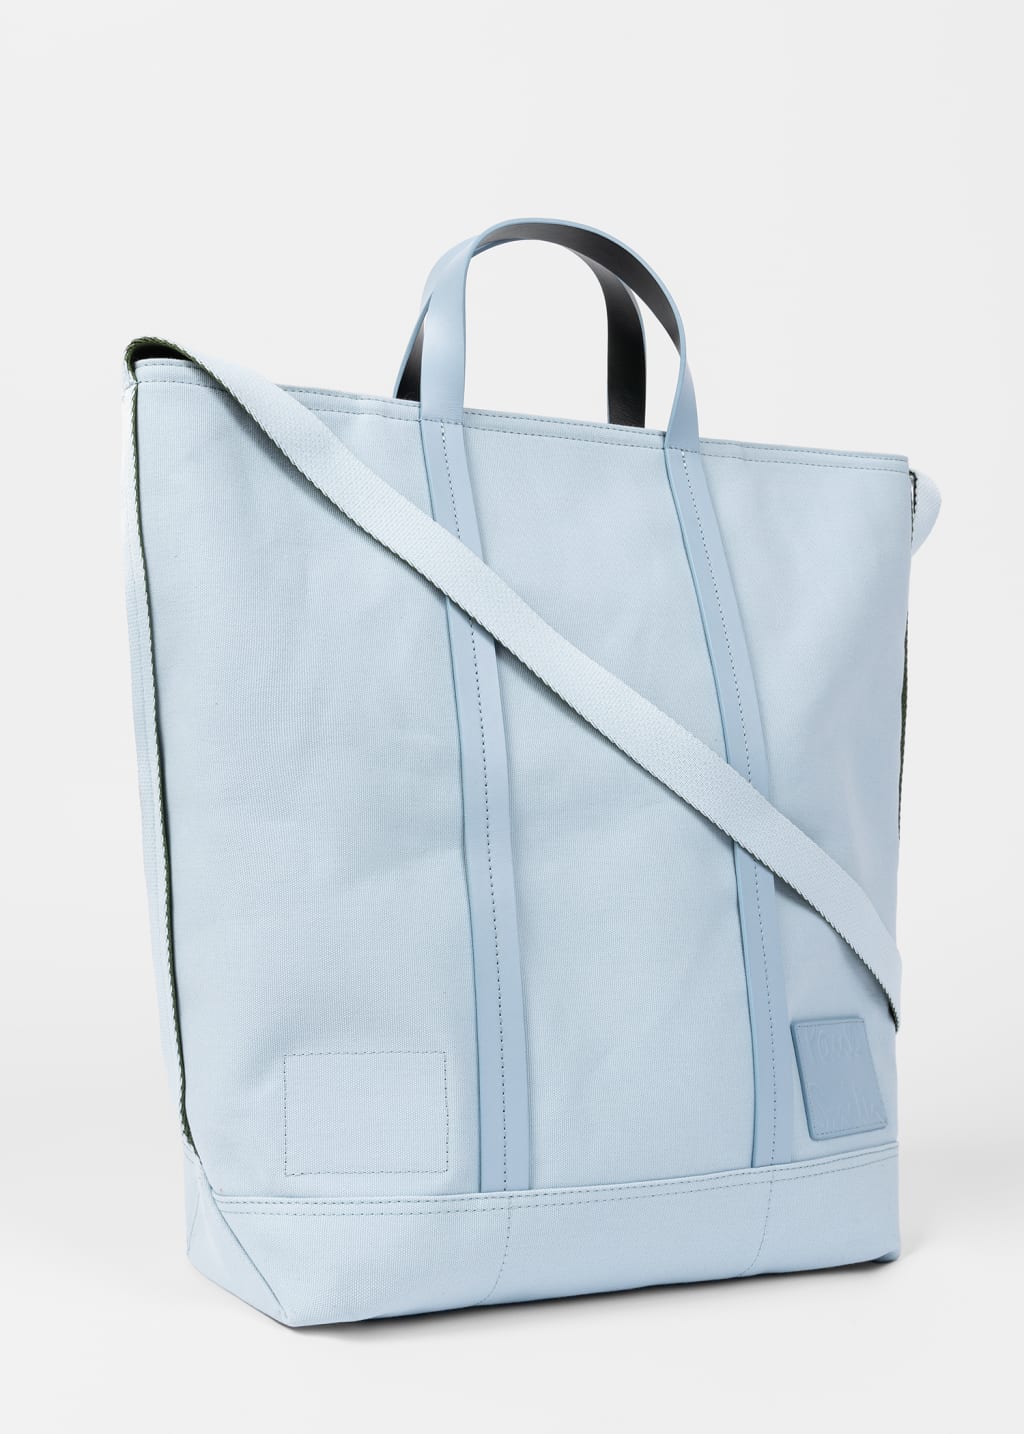 Detail View - Sky Blue Canvas Reversible Tote Bag With Shoulder Strap Paul Smith